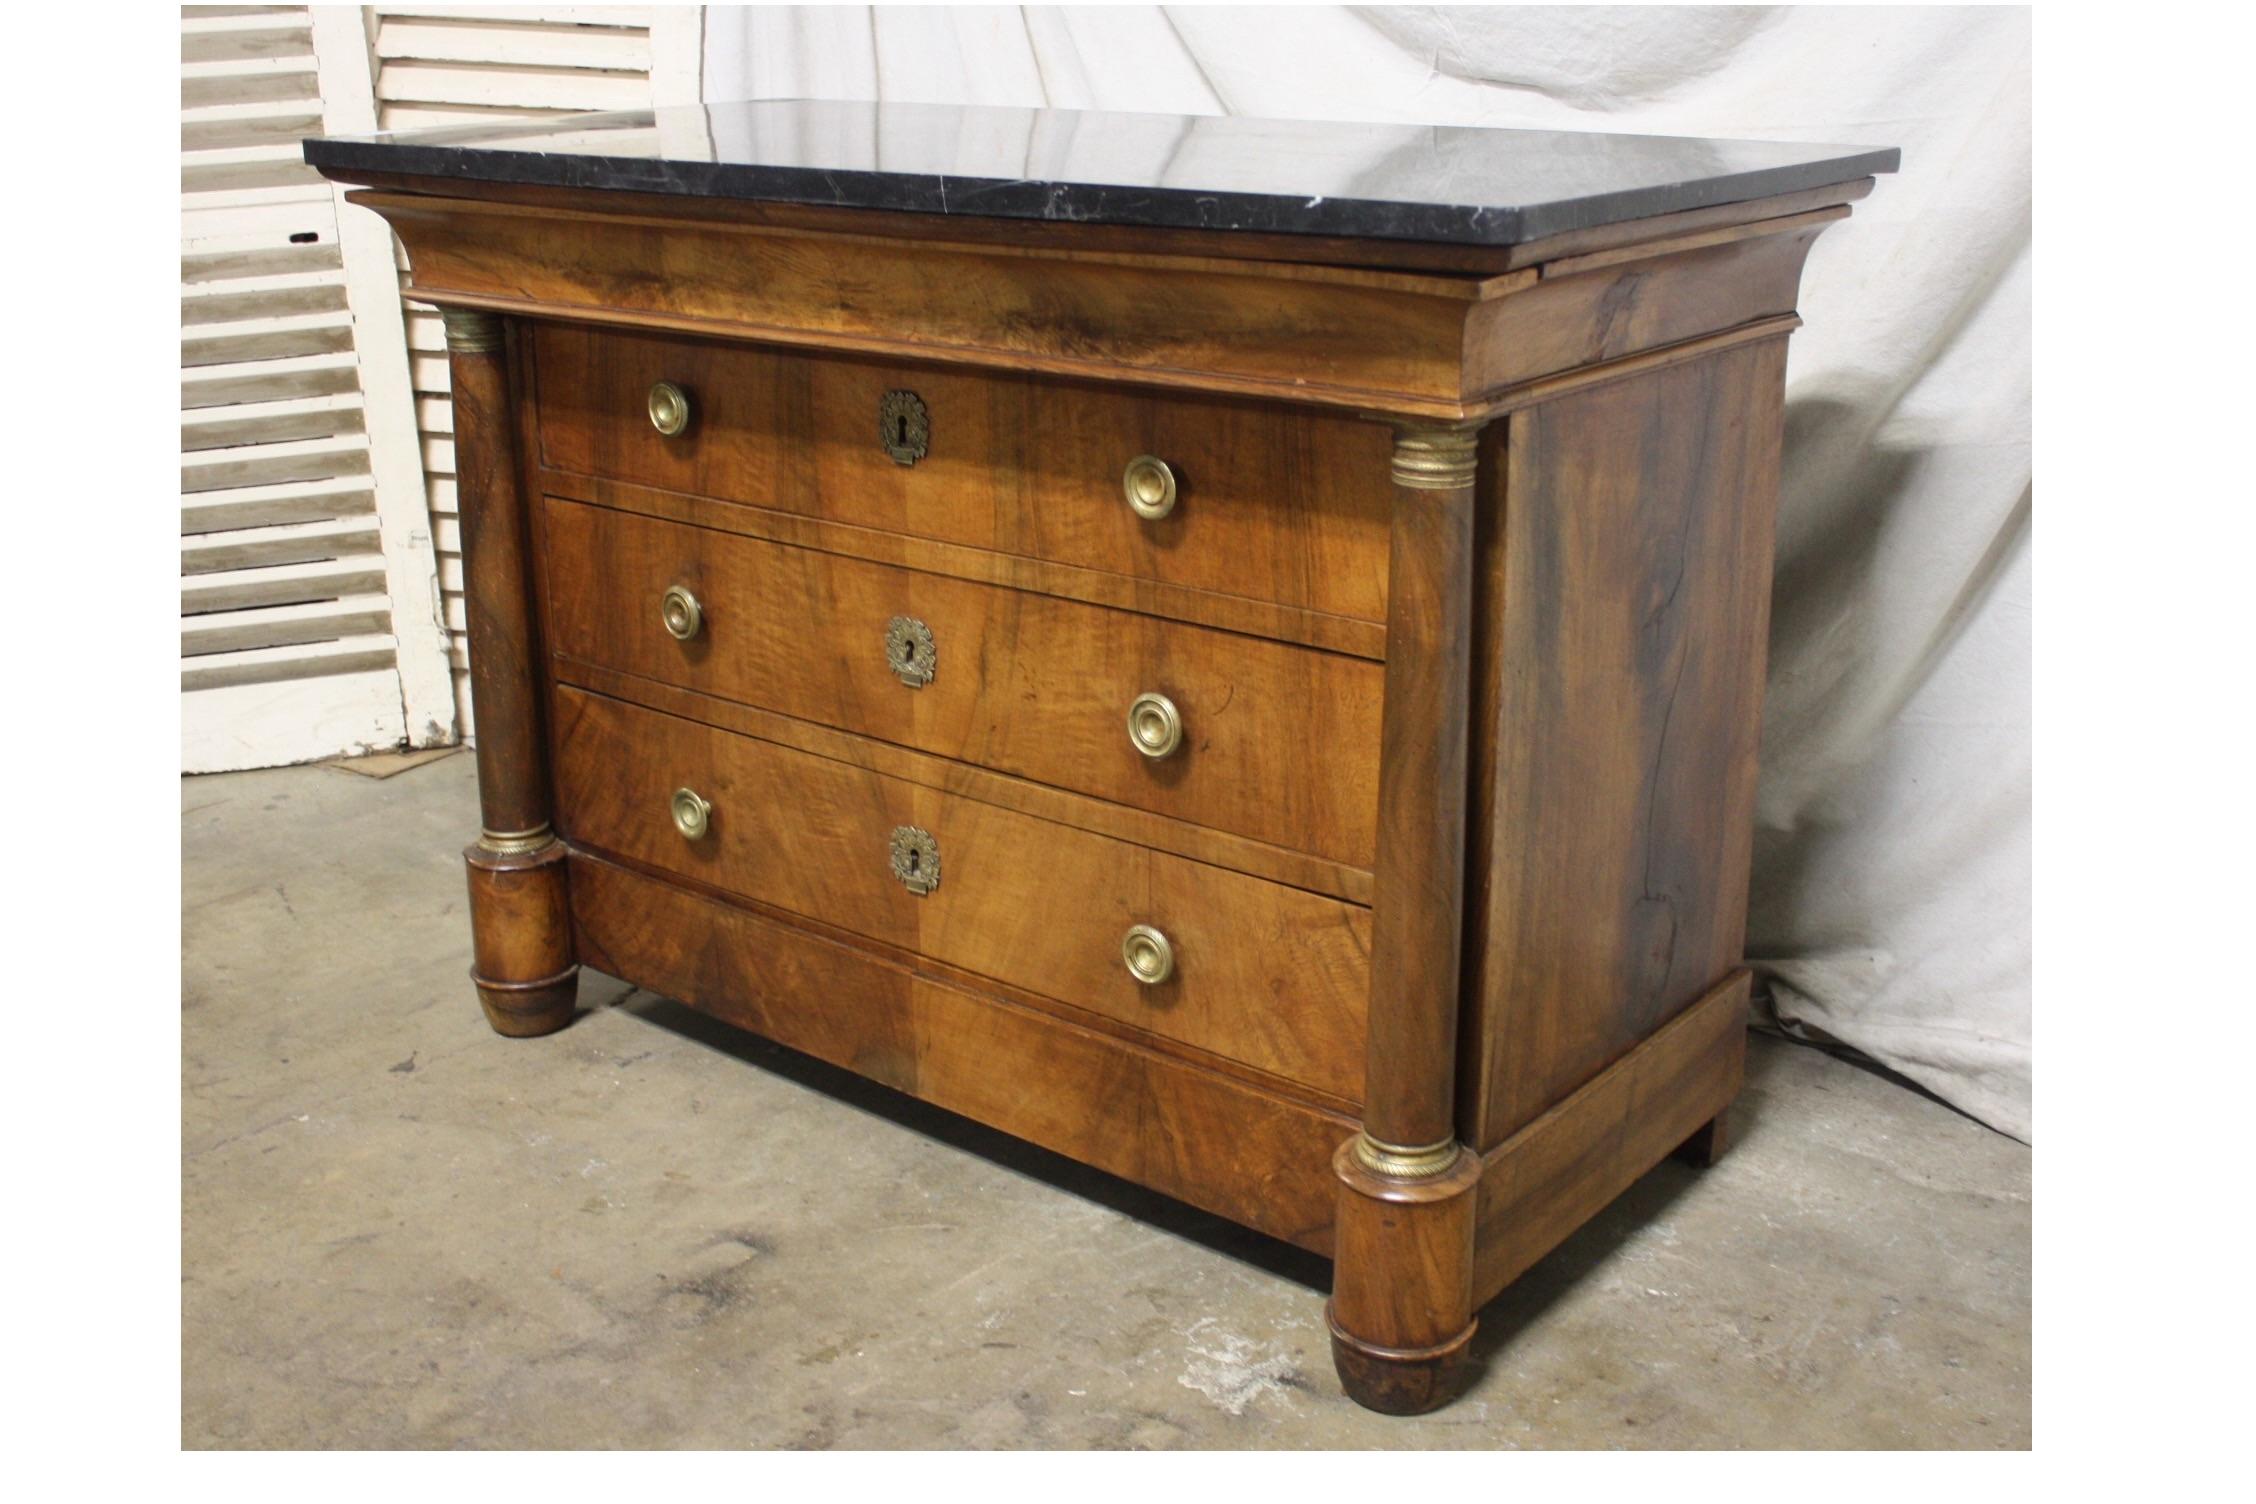 Charming 19th century French Empire chest.